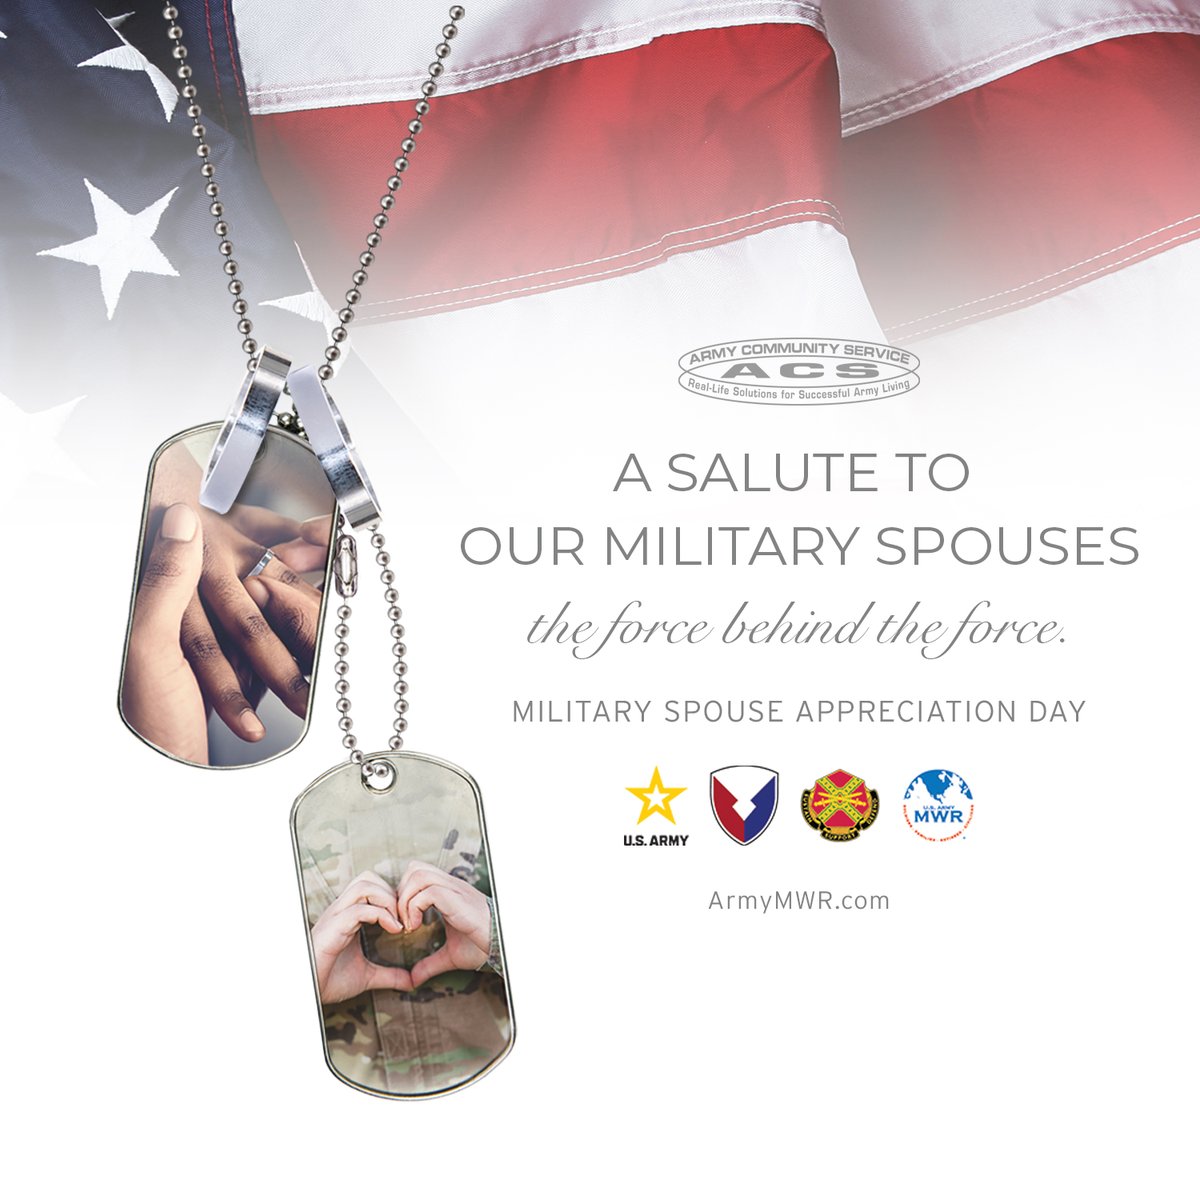 Let’s raise our voices for #MilitarySpouseAppreciationDay – the day we honor military spouses in our lives and communities! Thank you, military spouses – our servicemembers can do THEIR jobs because YOU do YOURS so well. armymwr.com/military-spous… from @FamilyMWR